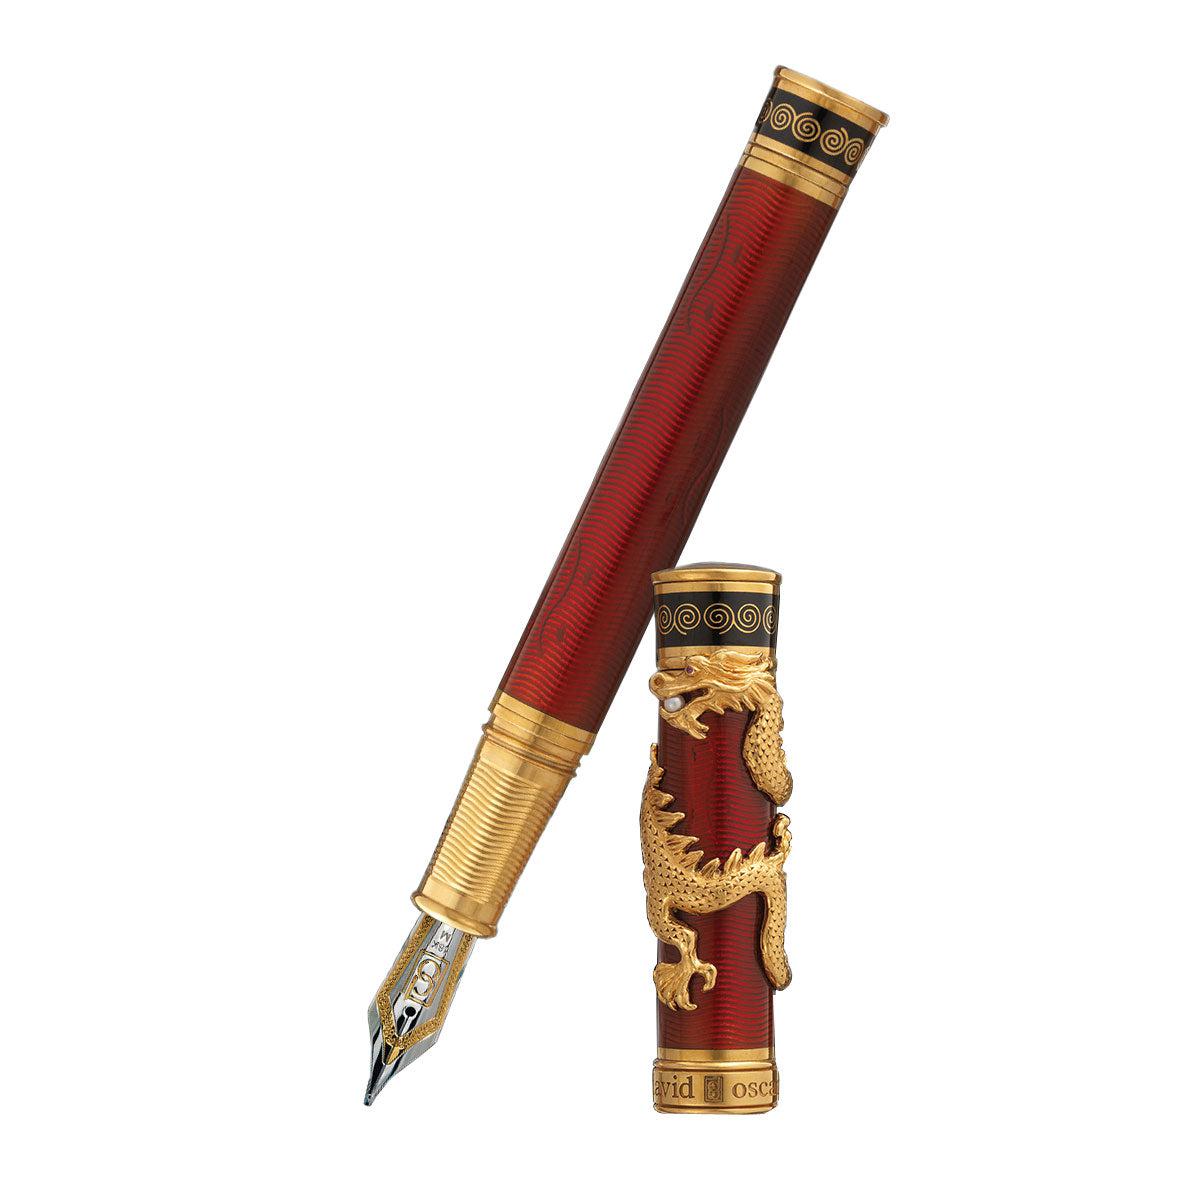 David Oscarson Black Water Dragon Fountain Pen - Translucent Ruby Red and Opaque Onyx Black Hard Enamel with Gold Vermeil-Pen Boutique Ltd